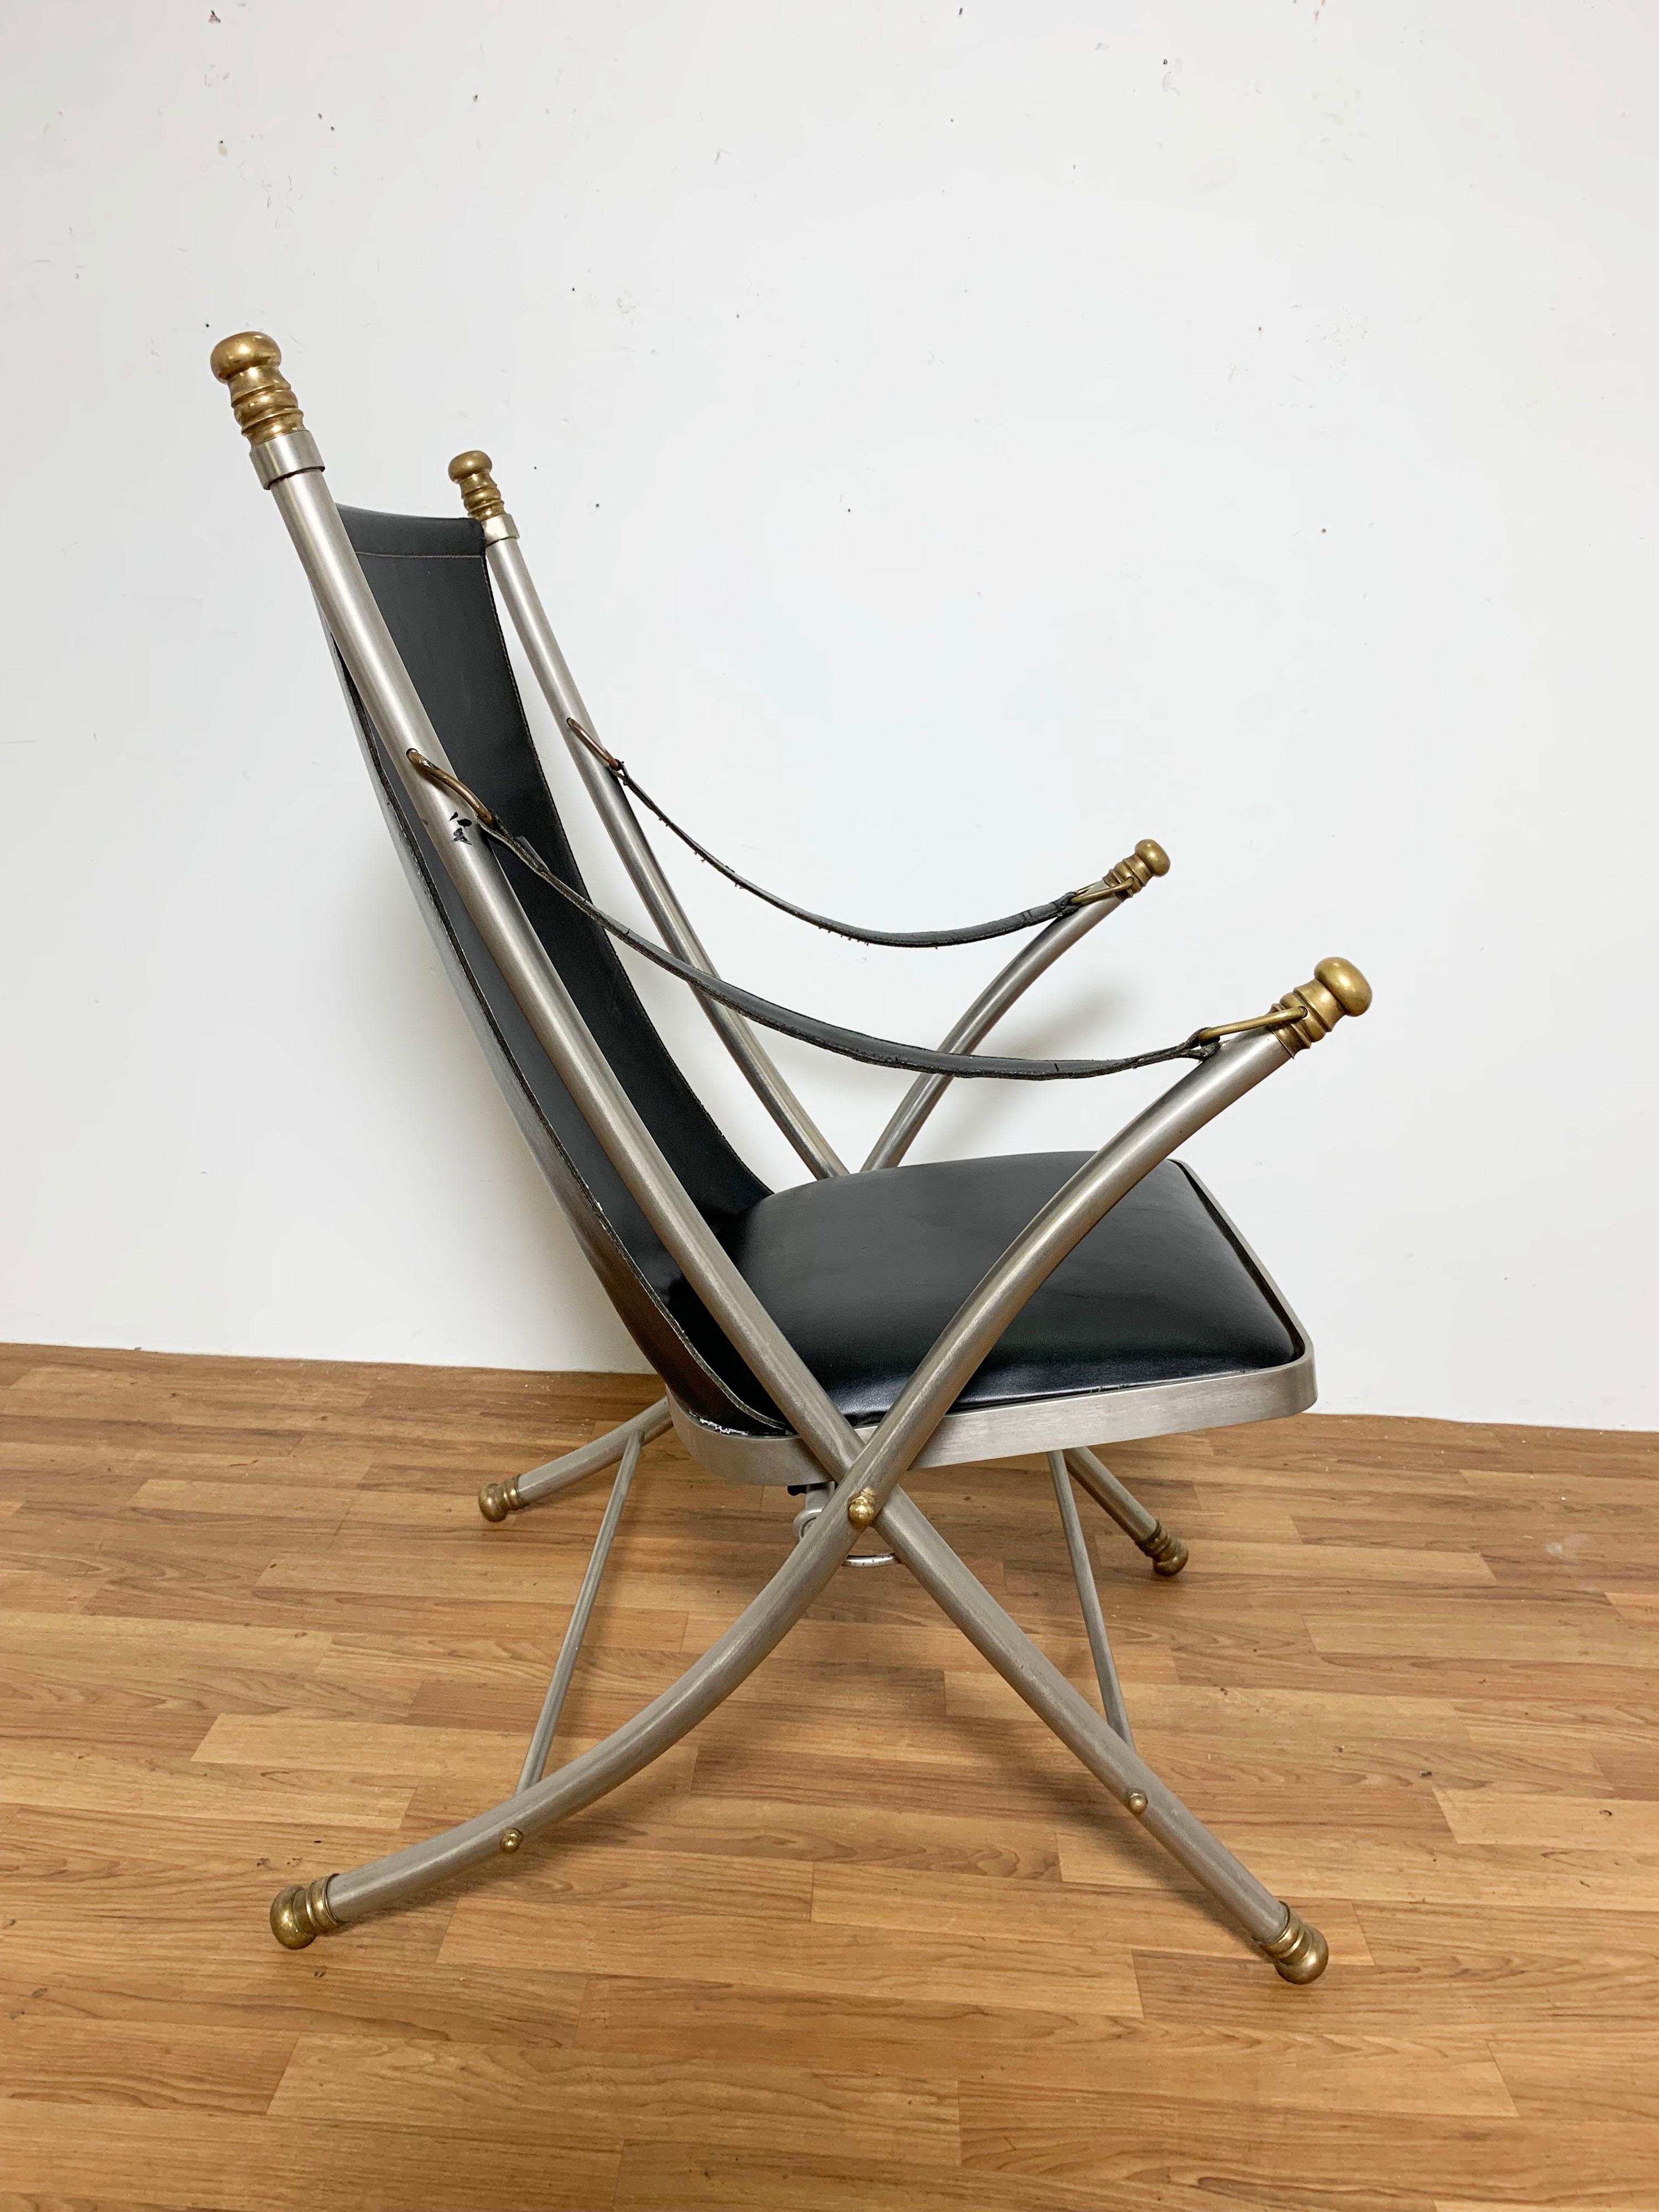 Mid-20th Century Maison Jansen Style Leather Campaign Chair, Circa 1960s For Sale